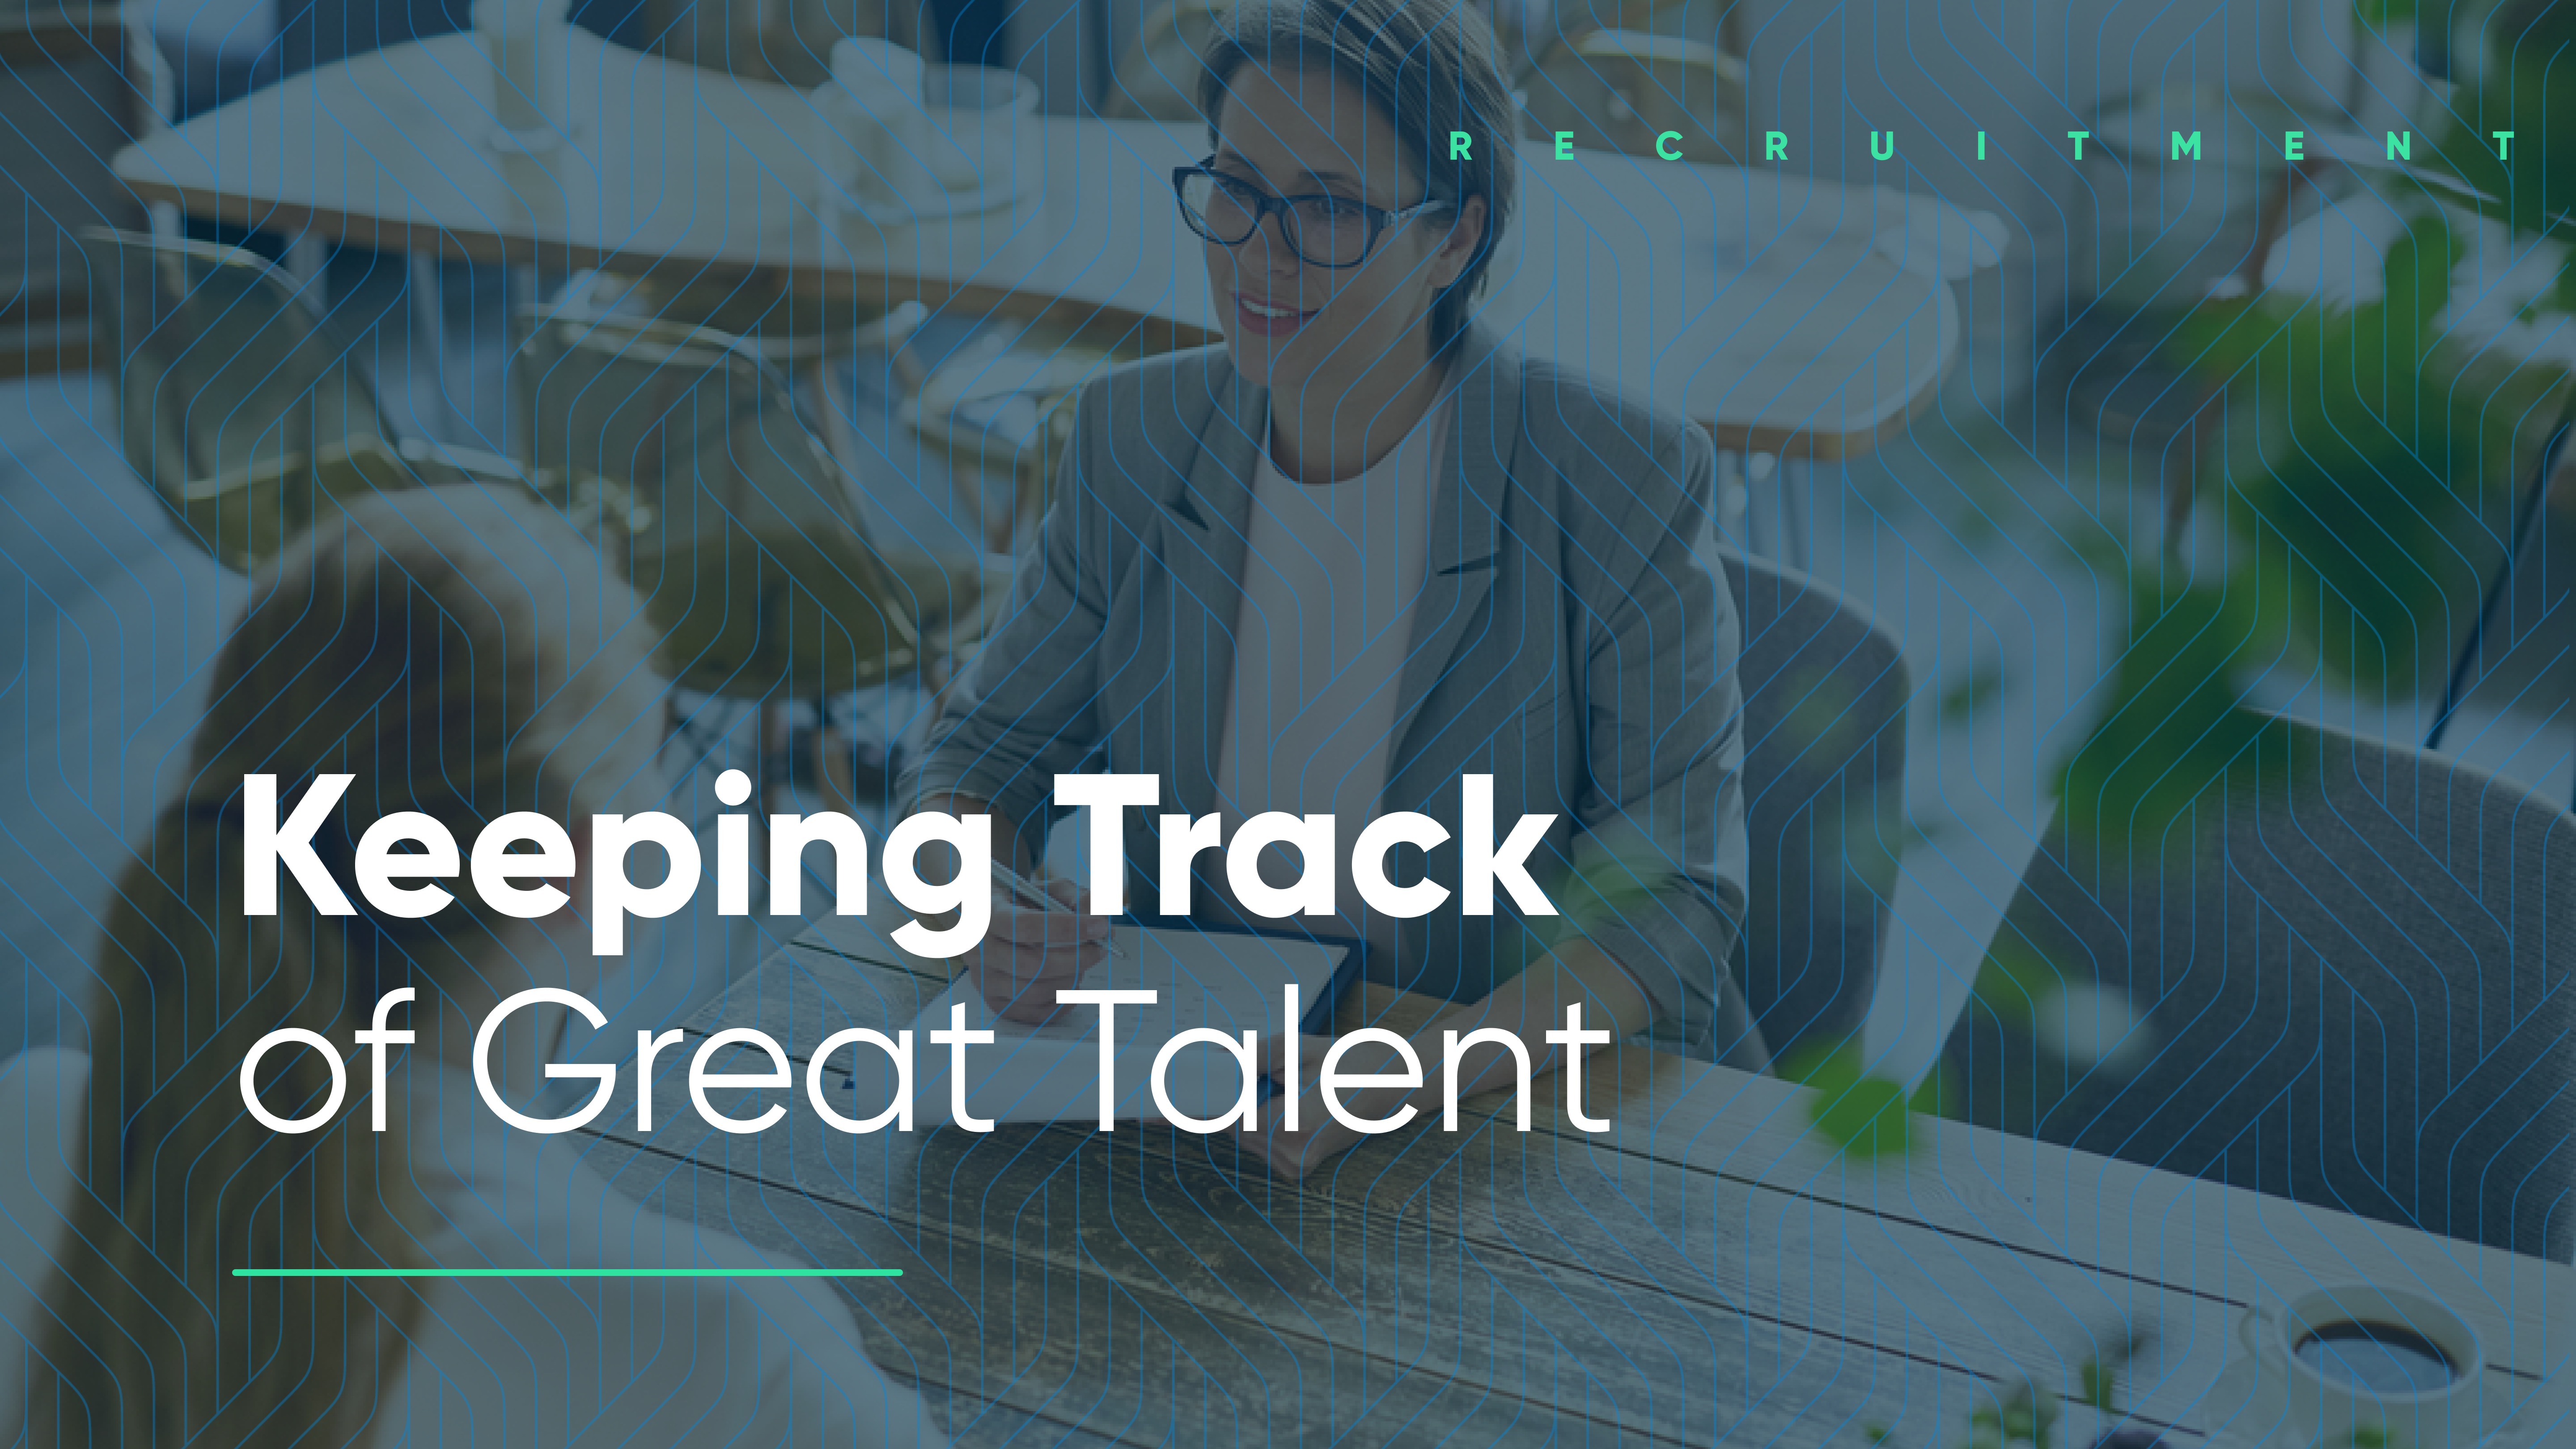 How to hire great talent